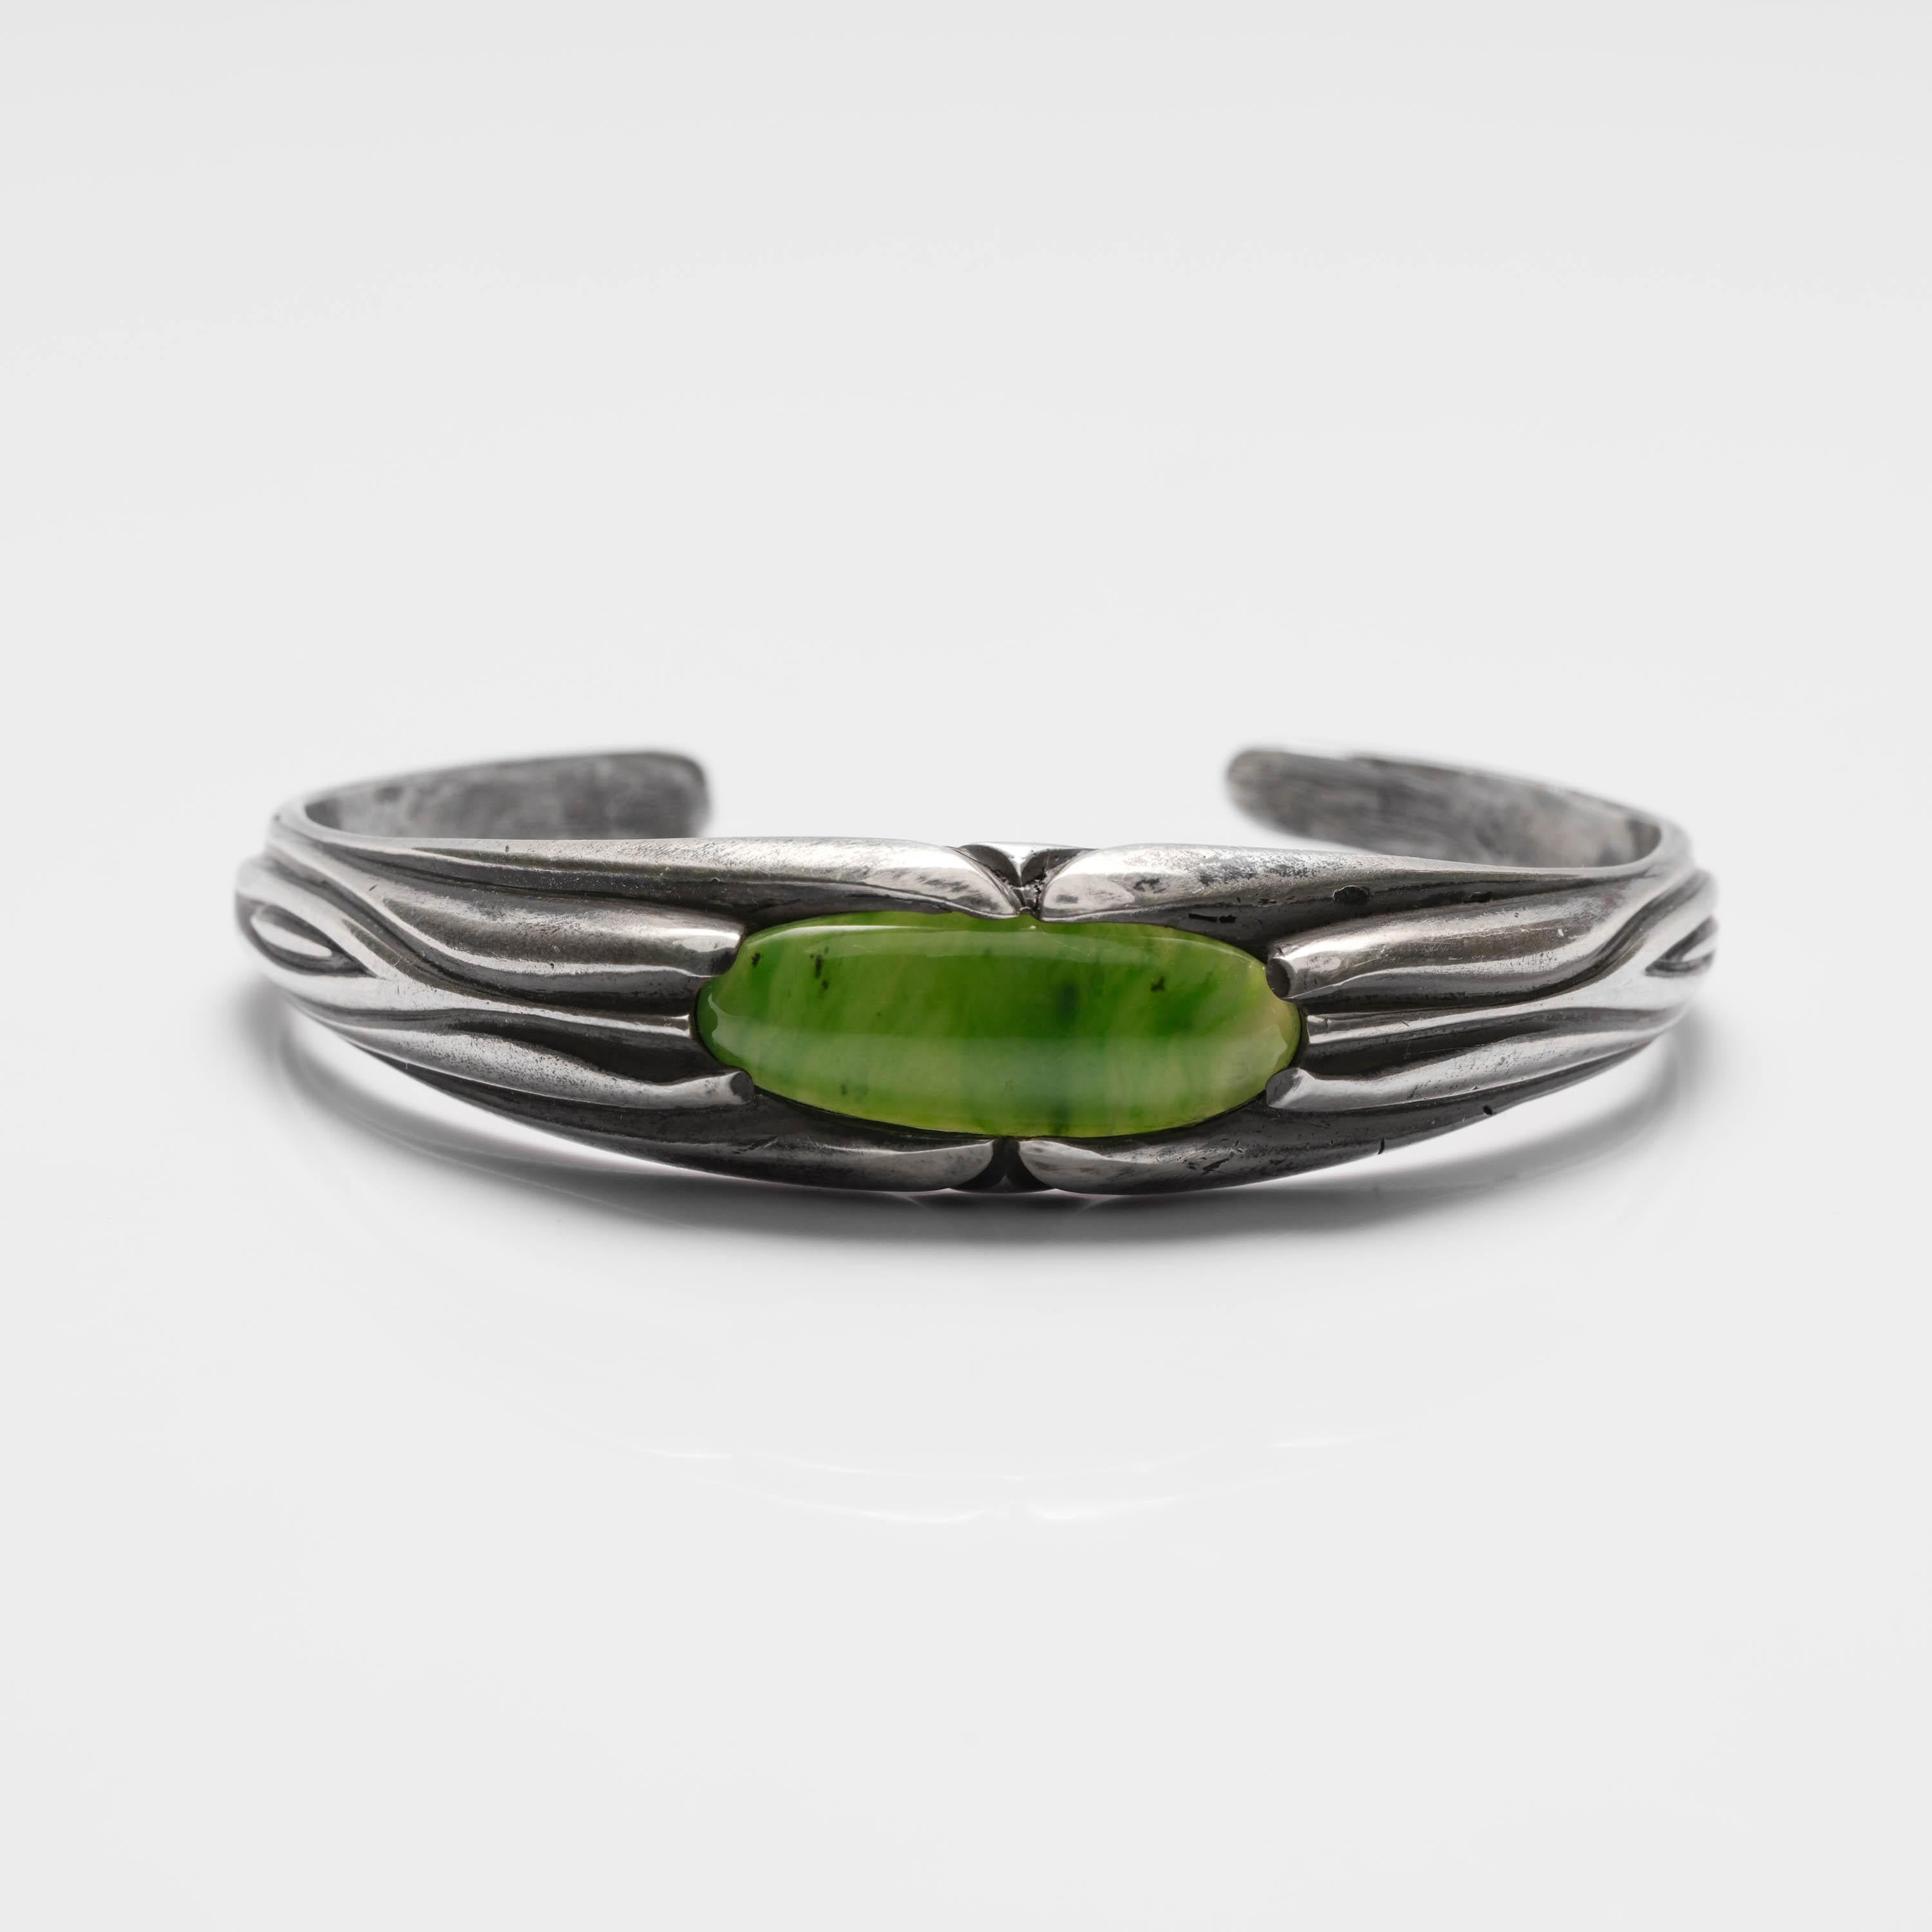 This handmade silver and jade bracelet was created by a master silversmith and features an oval cabochon of natural and untreated highly translucent nephrite jade. The cuff design makes the bracelet easy to slip on and off. It can be worn by anyone